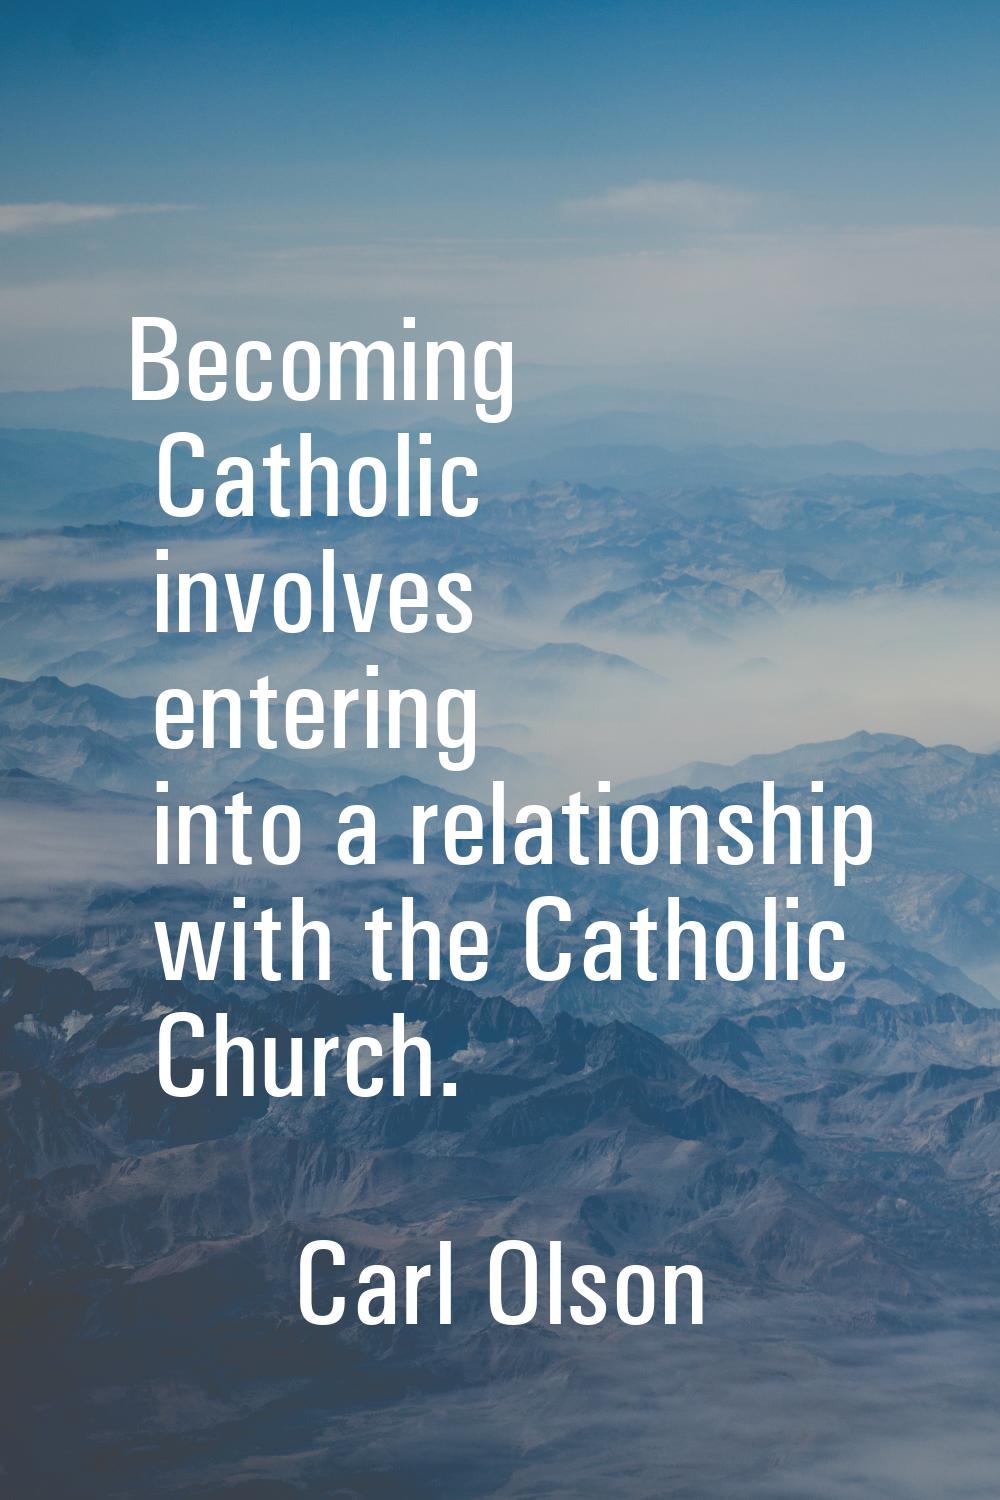 Becoming Catholic involves entering into a relationship with the Catholic Church.